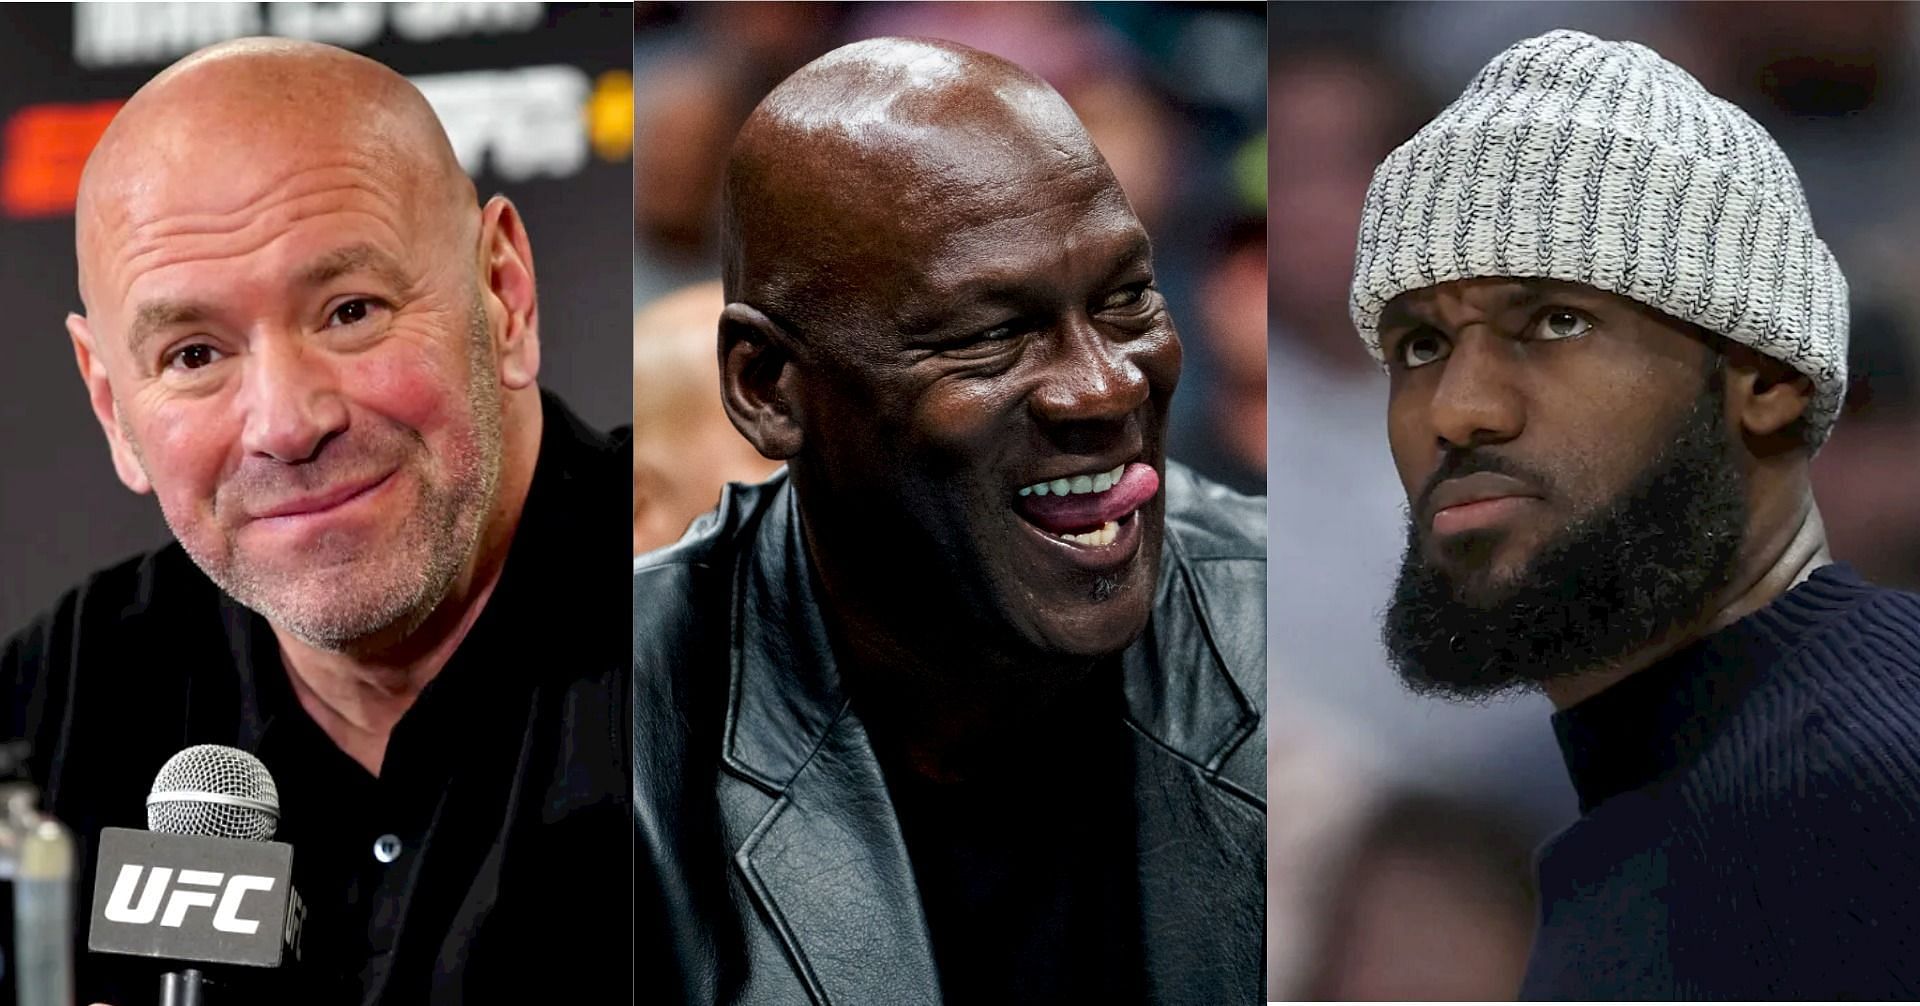 Dana White praises LeBron James, but claims Michael Jordan would have wiped him out in a slap